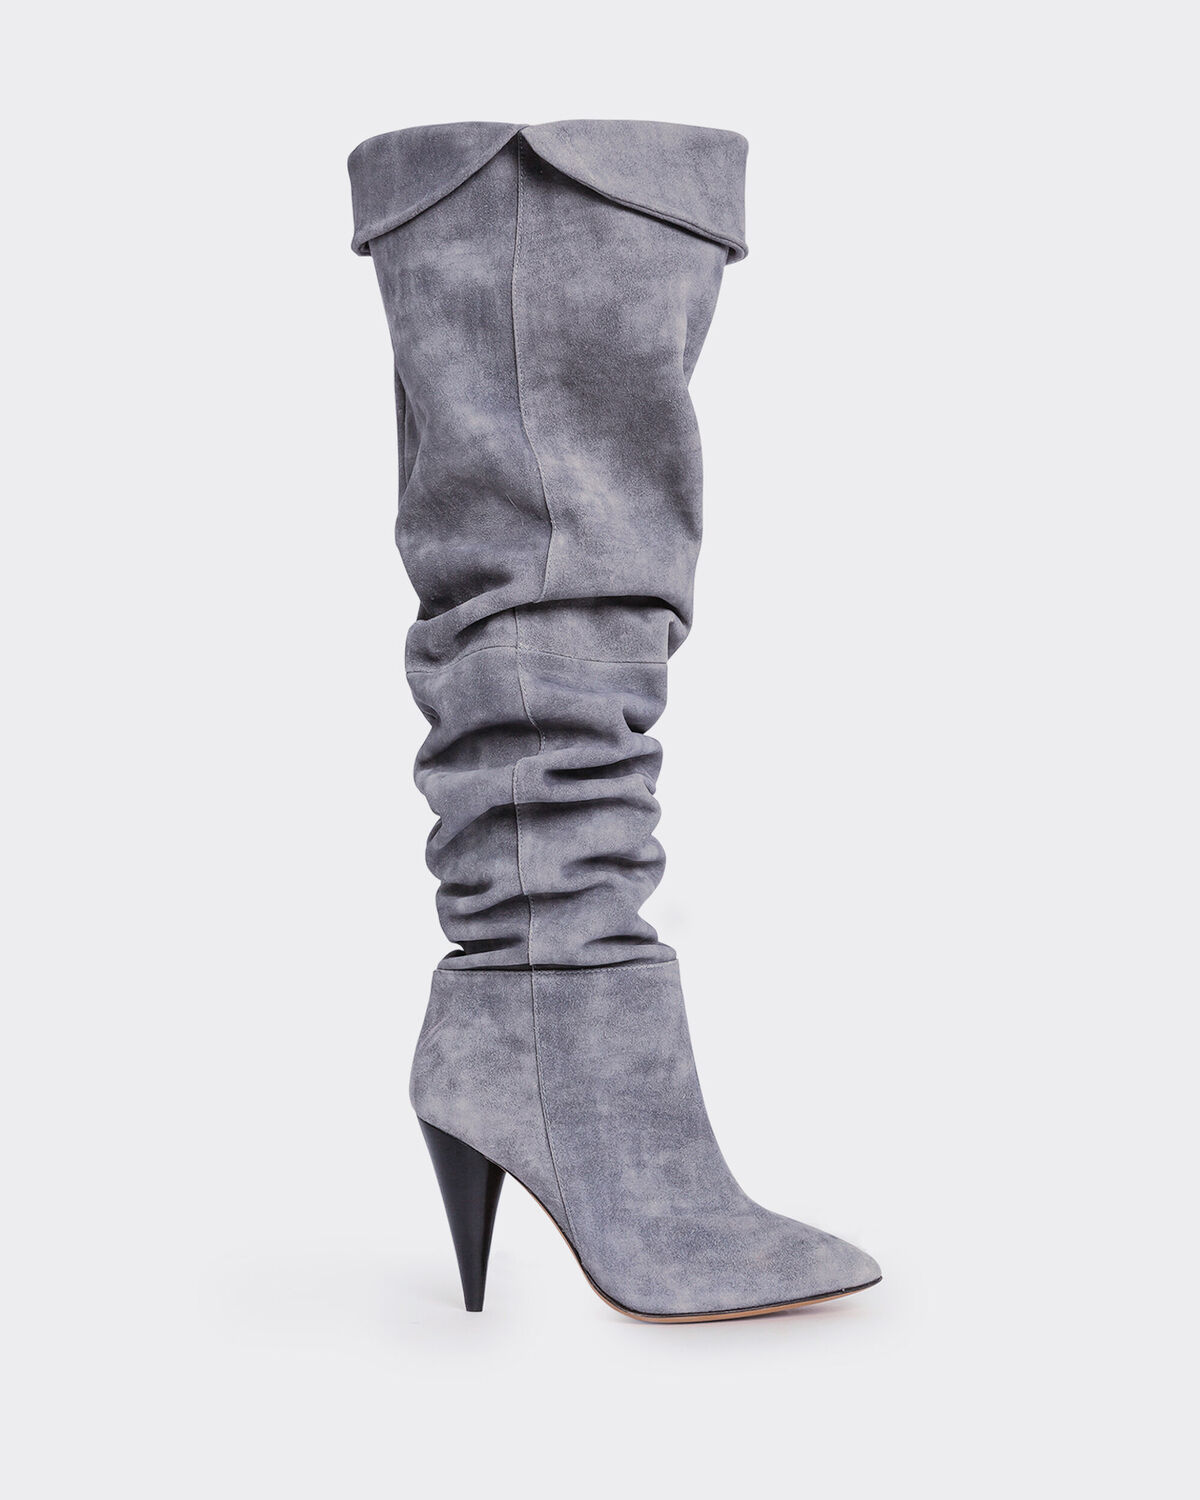 Photo of IRO Paris Groove Boots Grey - This Year Iro Plays With Volumes And Offers This Pair Of High Boots All In Pleated. They Are Distinguished By Their Funnel Heel And Reverse. Combine Them With A Fluid Dress For A Feminine Look. Fall Winter 19